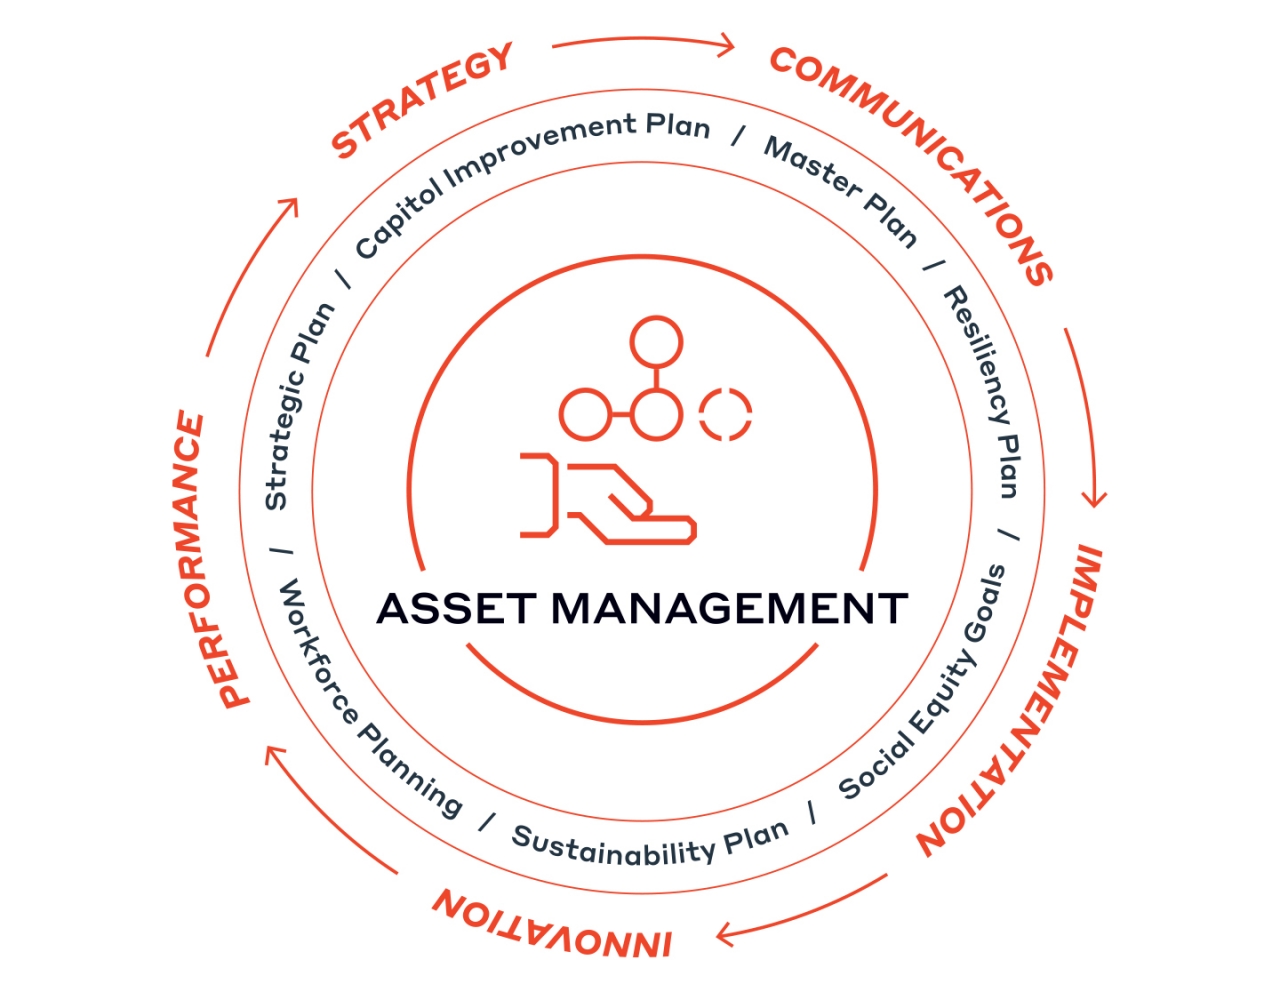 ©2021 WSP USA I The success of an asset management program within a wider sphere of corporate initiatives can be driven by an organizational “ecosystem” of connected programs, strategies and objectives.